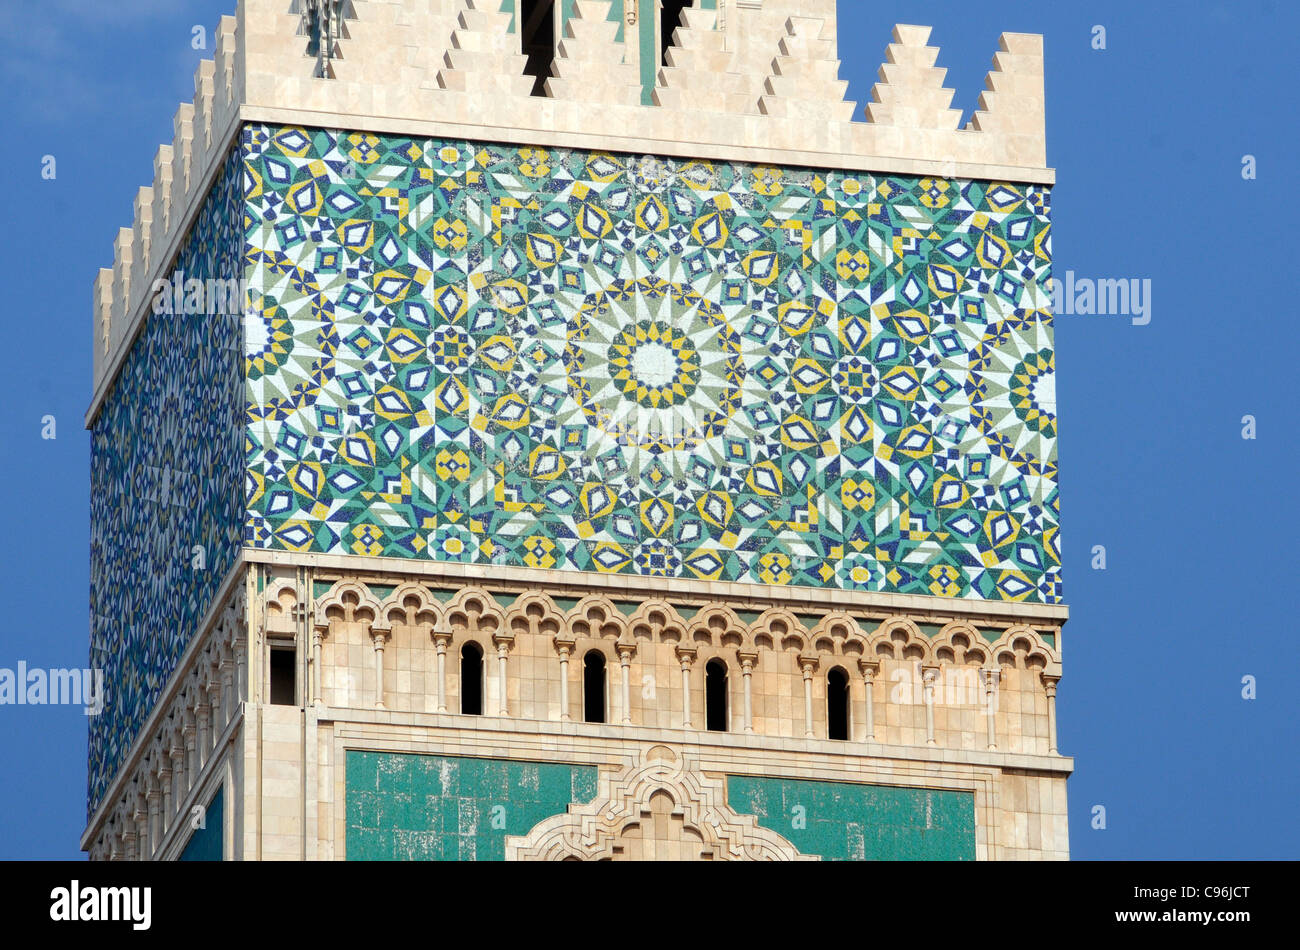 Close-up of the Hassan II mosque's minaret in Casablanca, Morocco, is one of the largest Muslim religious building in the world. Stock Photo